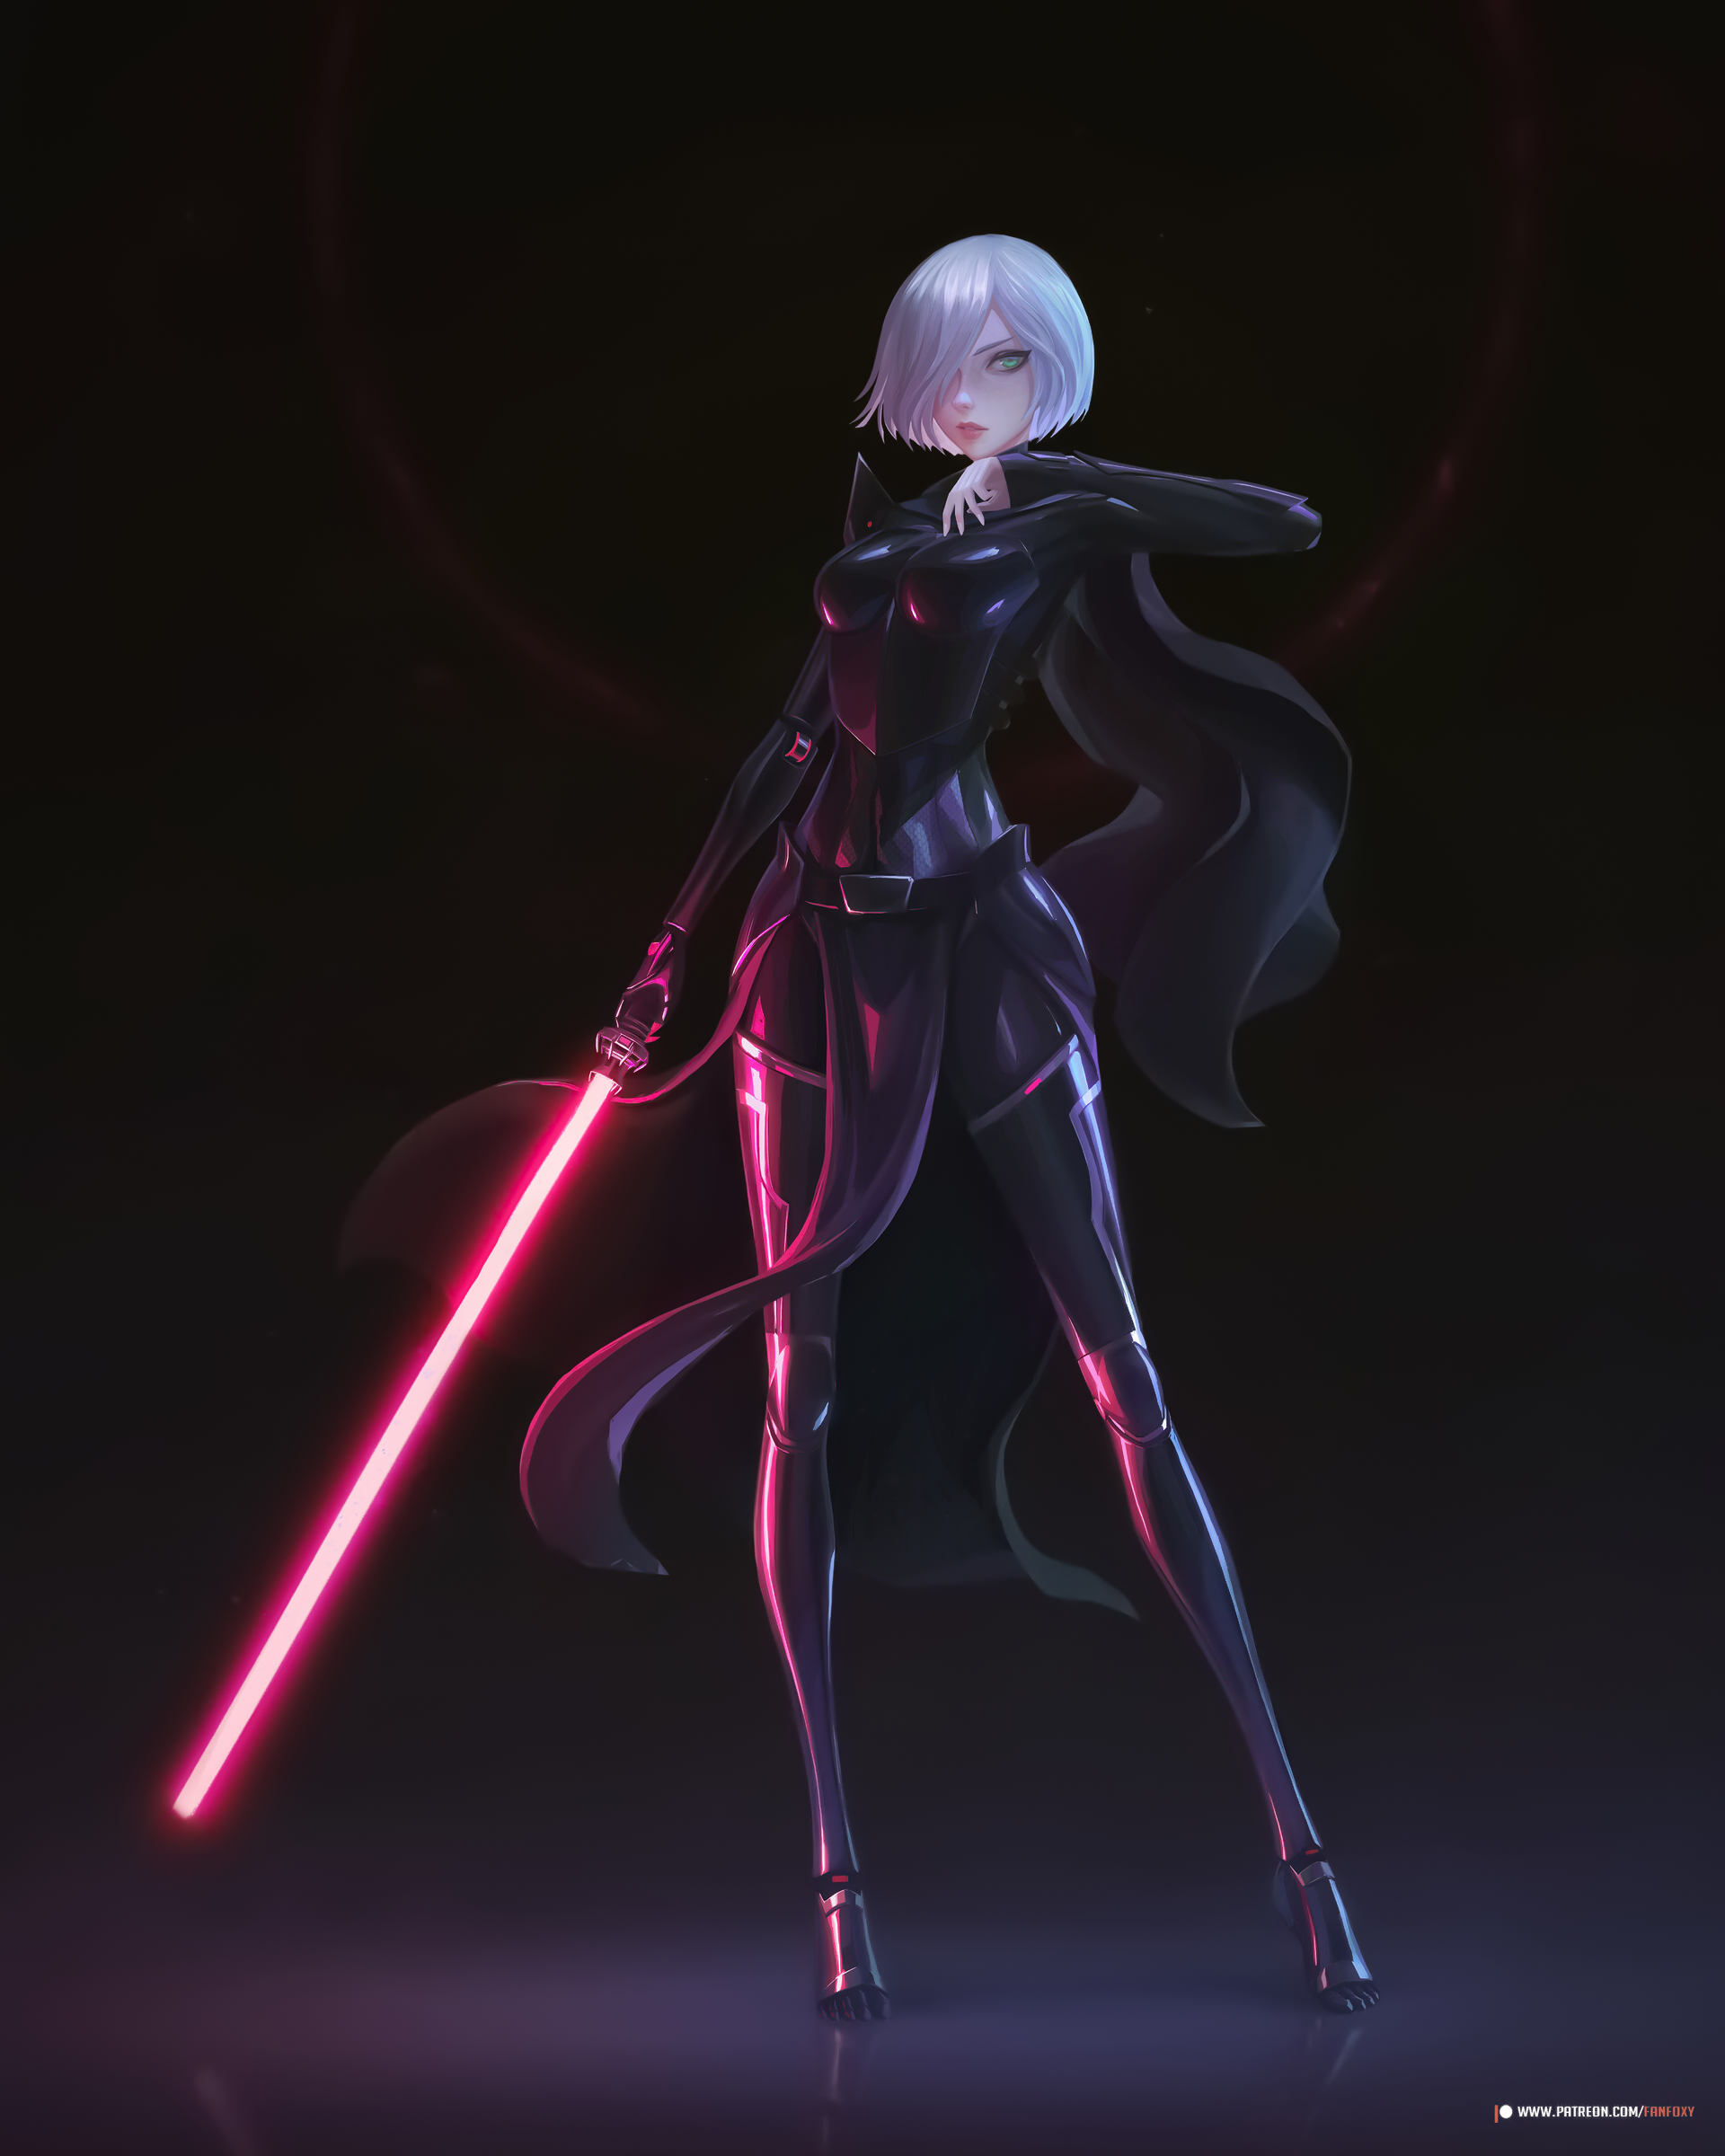 General 1920x2400 Fanfoxy drawing women Star Wars Sith simple background lightsaber silver hair dark portrait display digital art watermarked low light minimalism standing hair over one eye short hair blue eyes tiptoe reflection cape parted lips